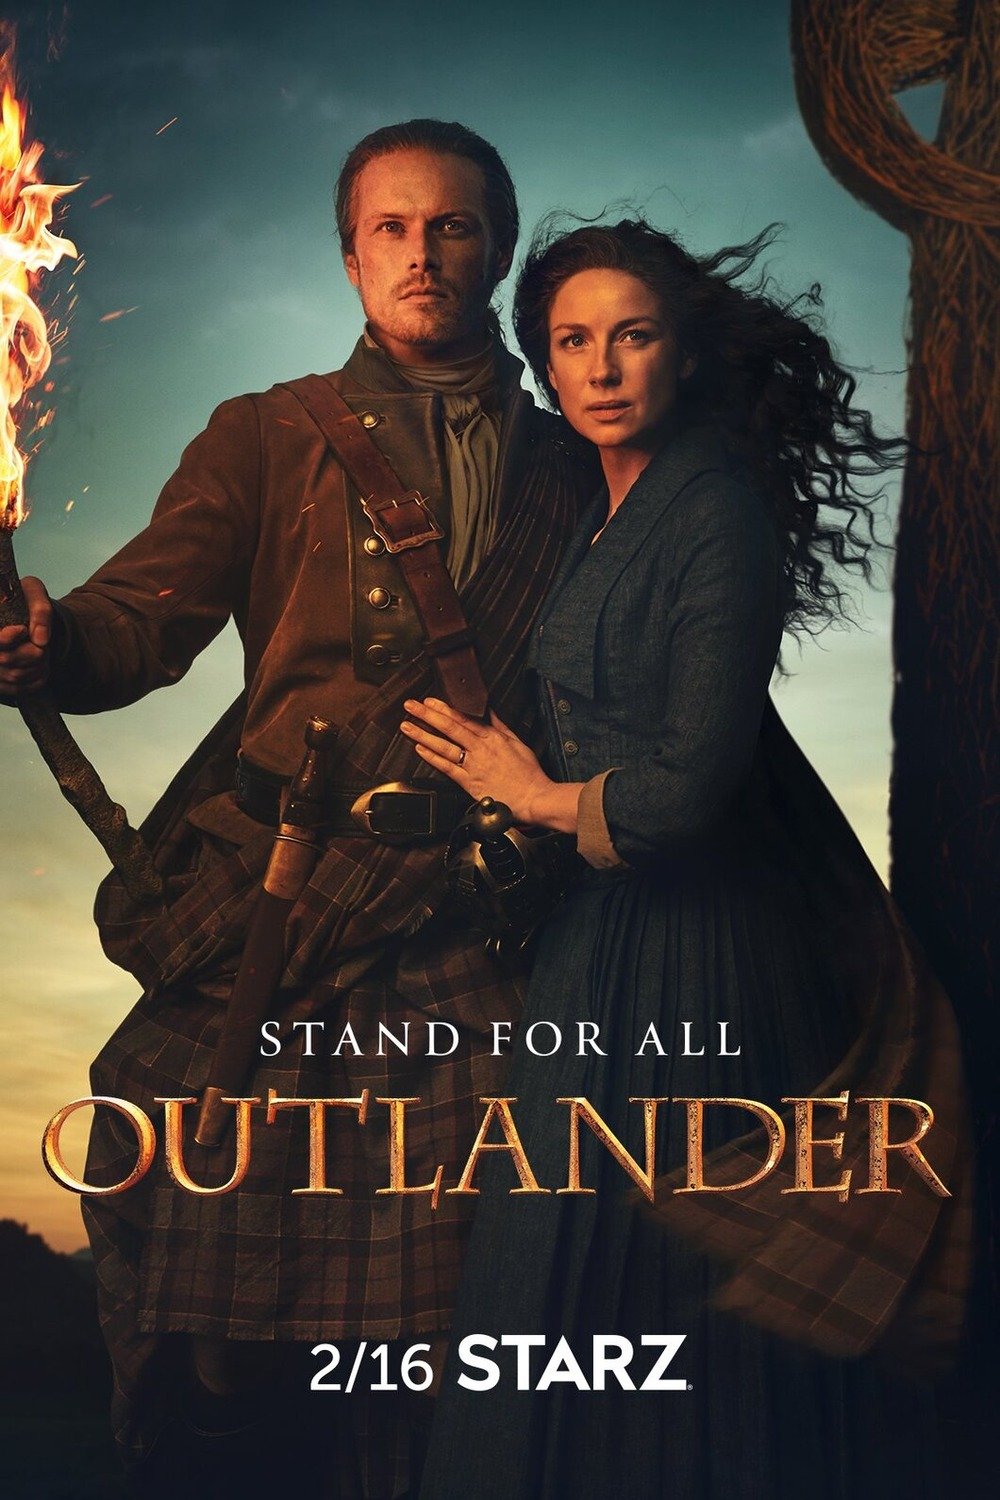 Poster of the movie Outlander